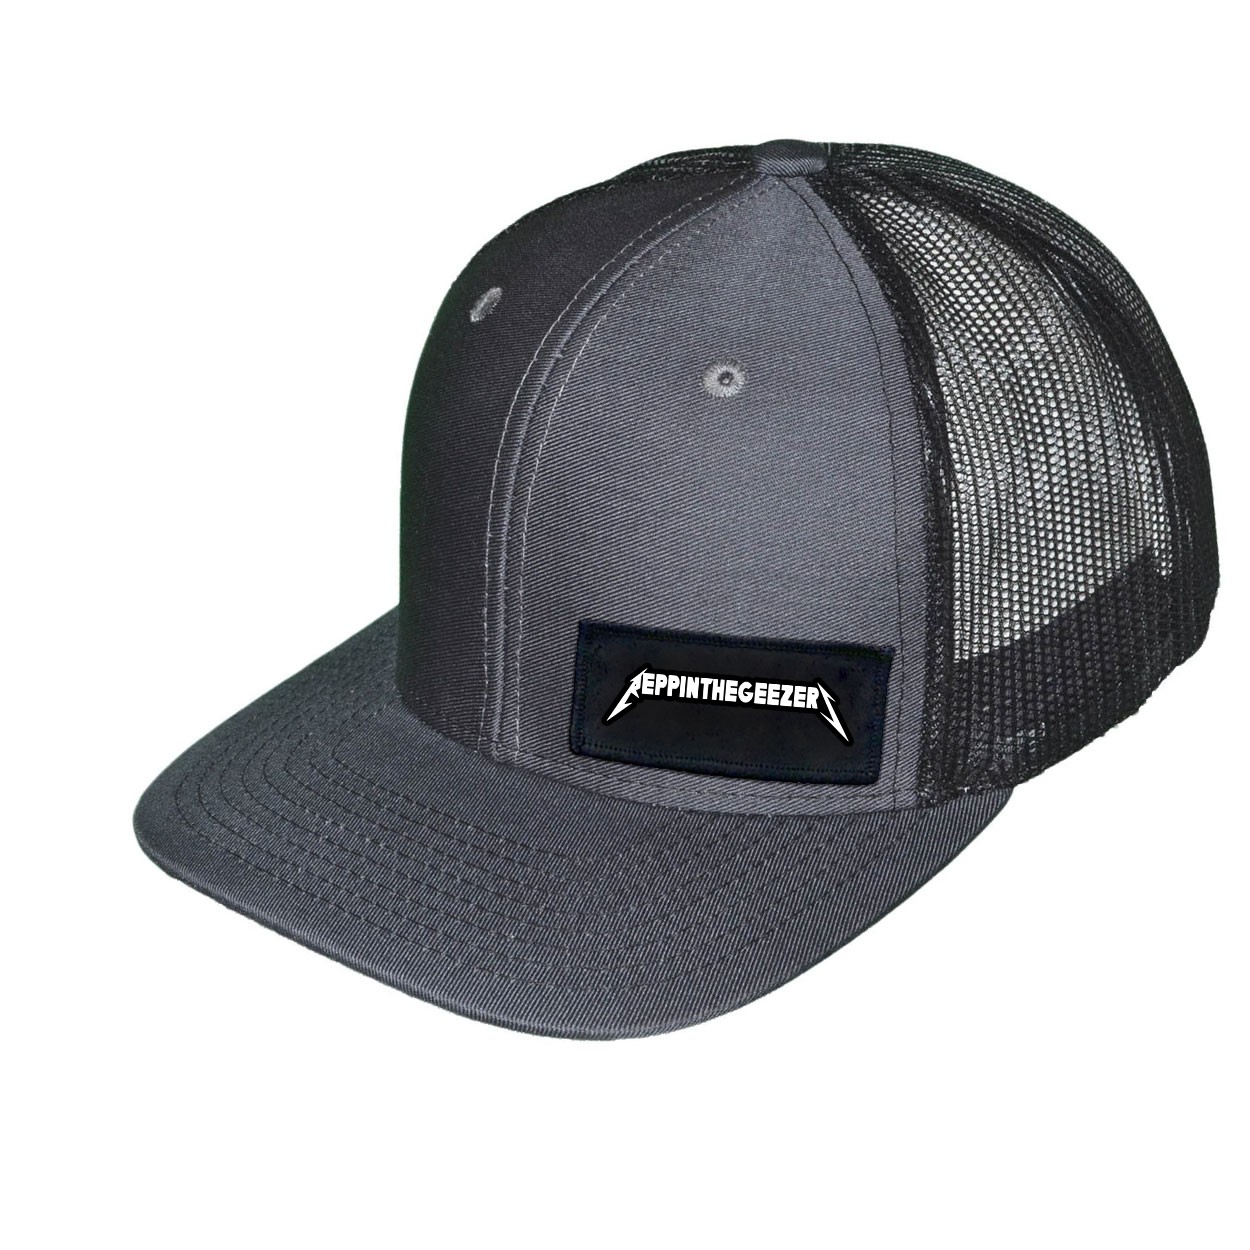 Metal Geezer Night Out Woven Patch Snapback Trucker Hat Gray/Black (White Logo)